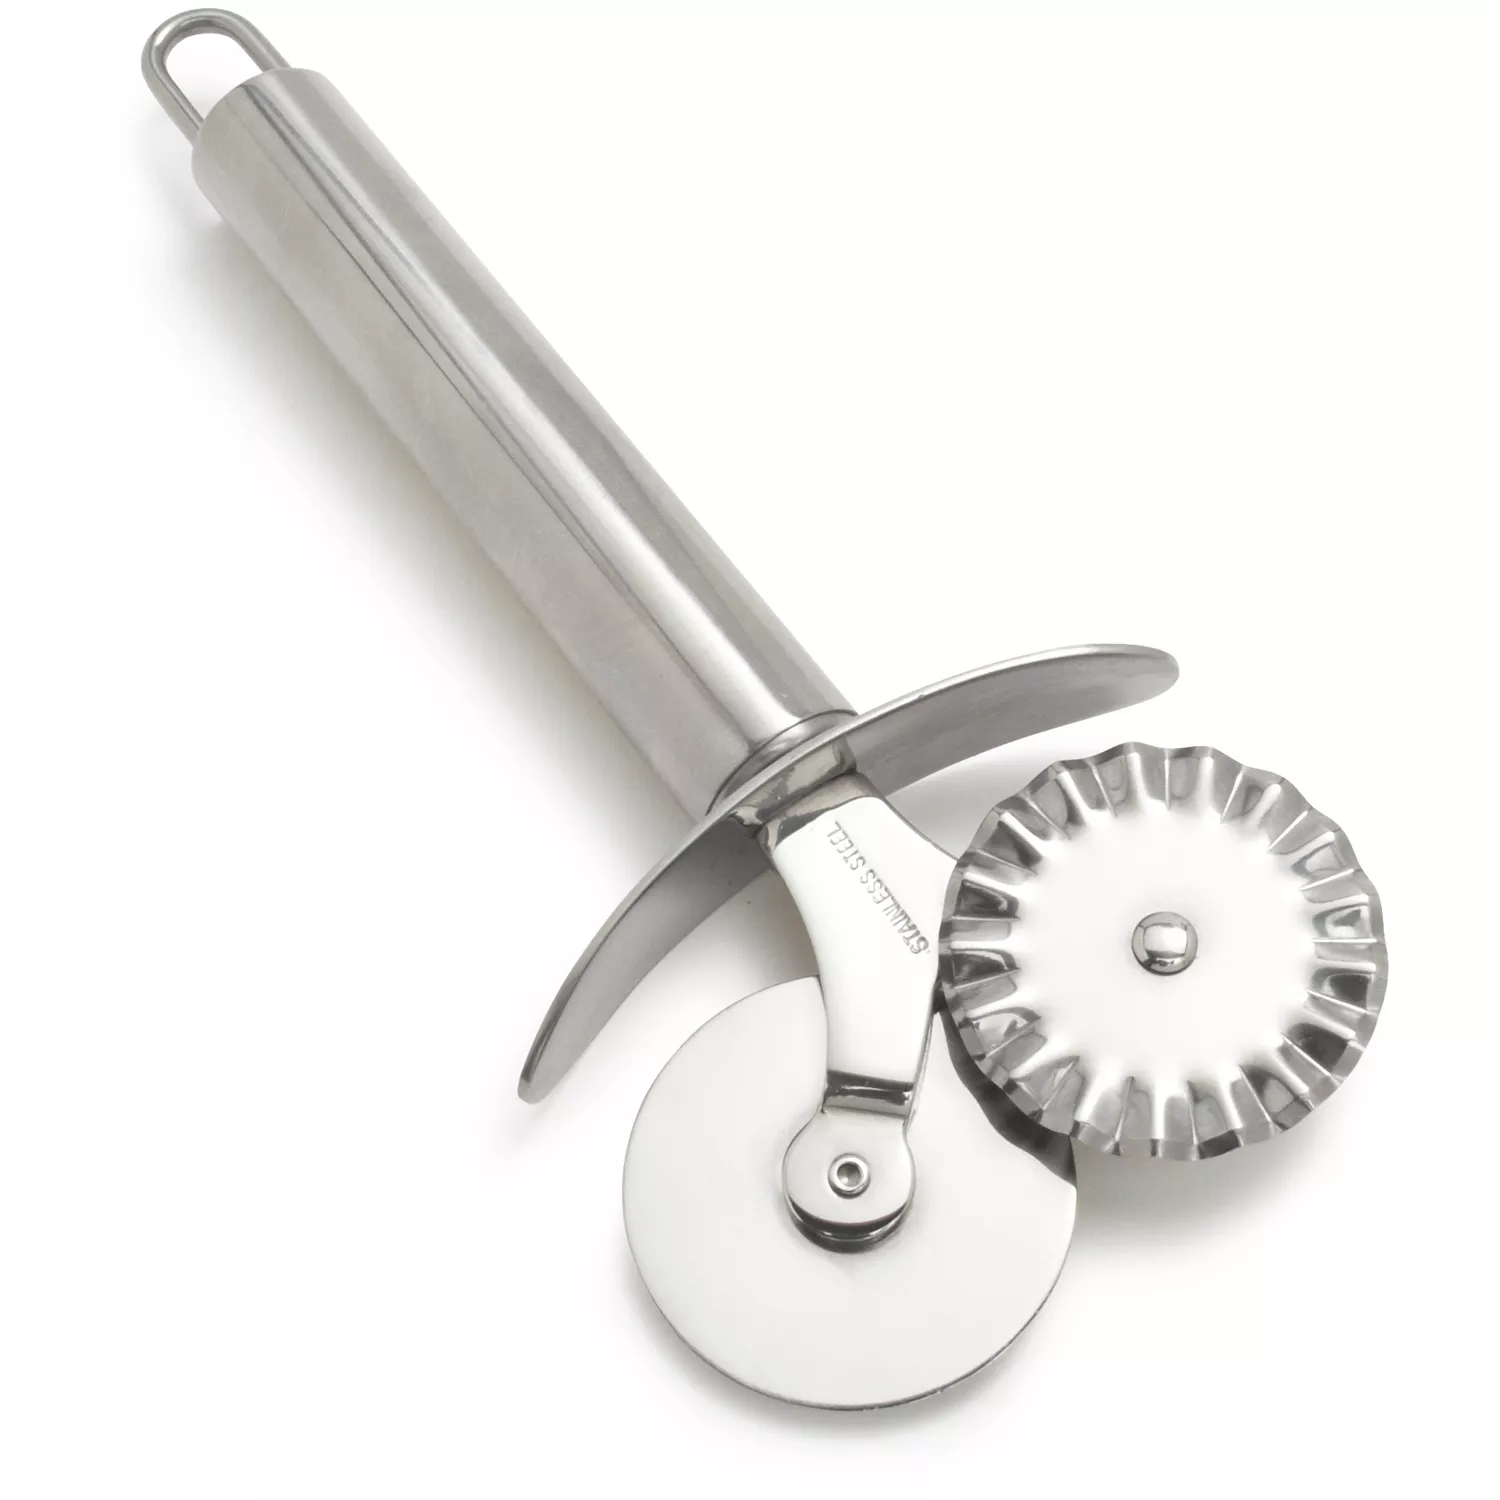 Sur La Table Stainless Steel Double Pastry Cutter, Silver